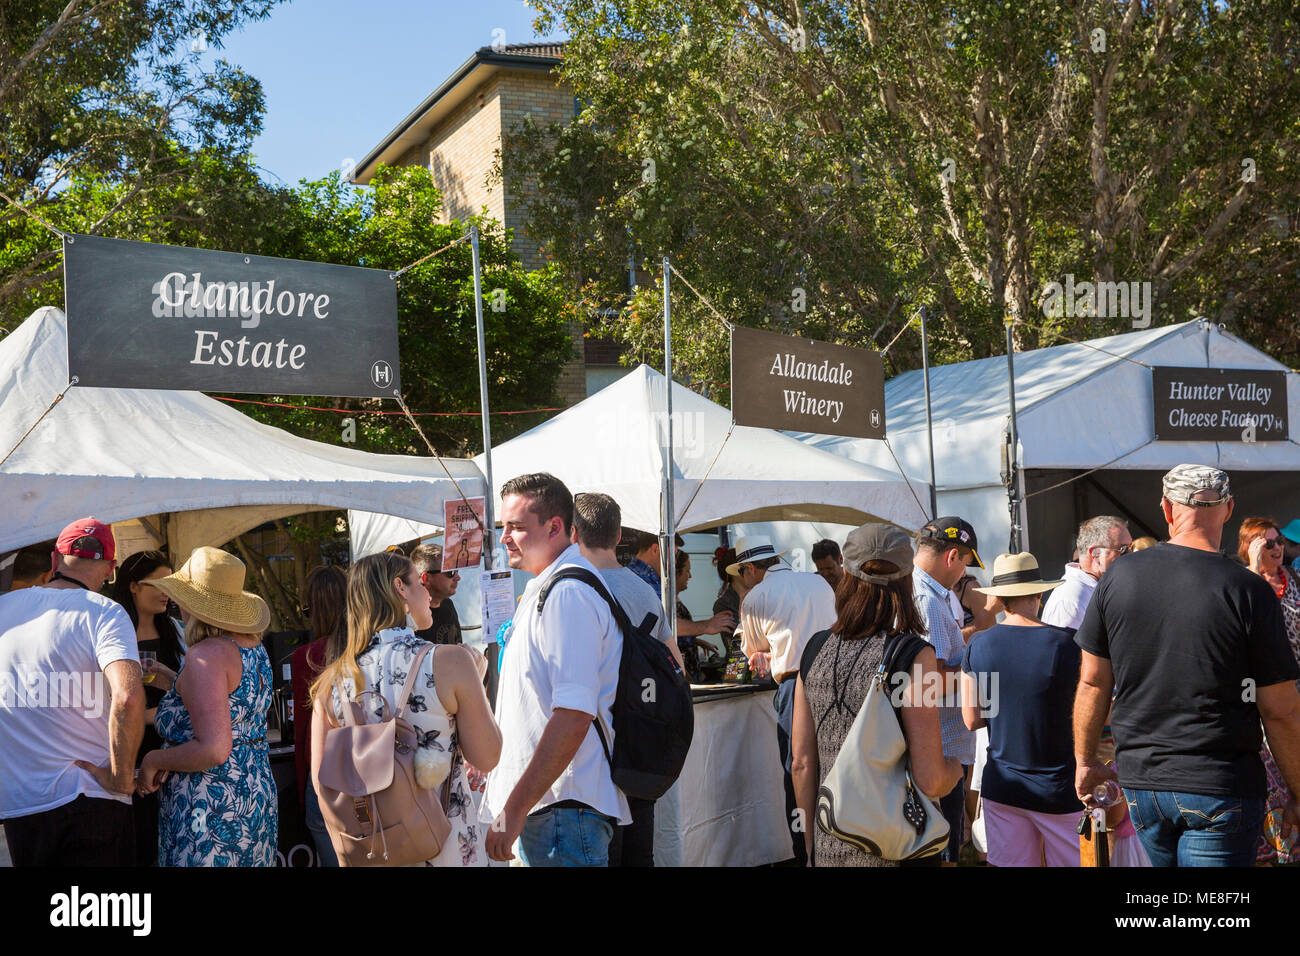 Sunday 22nd April 2018, Sydney,Australia. Annual Hunter Valley wine growers descend on Avalon Beach suburb in Sydney for Uncorked Avalon for fine food and wine tasting and sales. Credit: martin berry/Alamy Live News Stock Photo